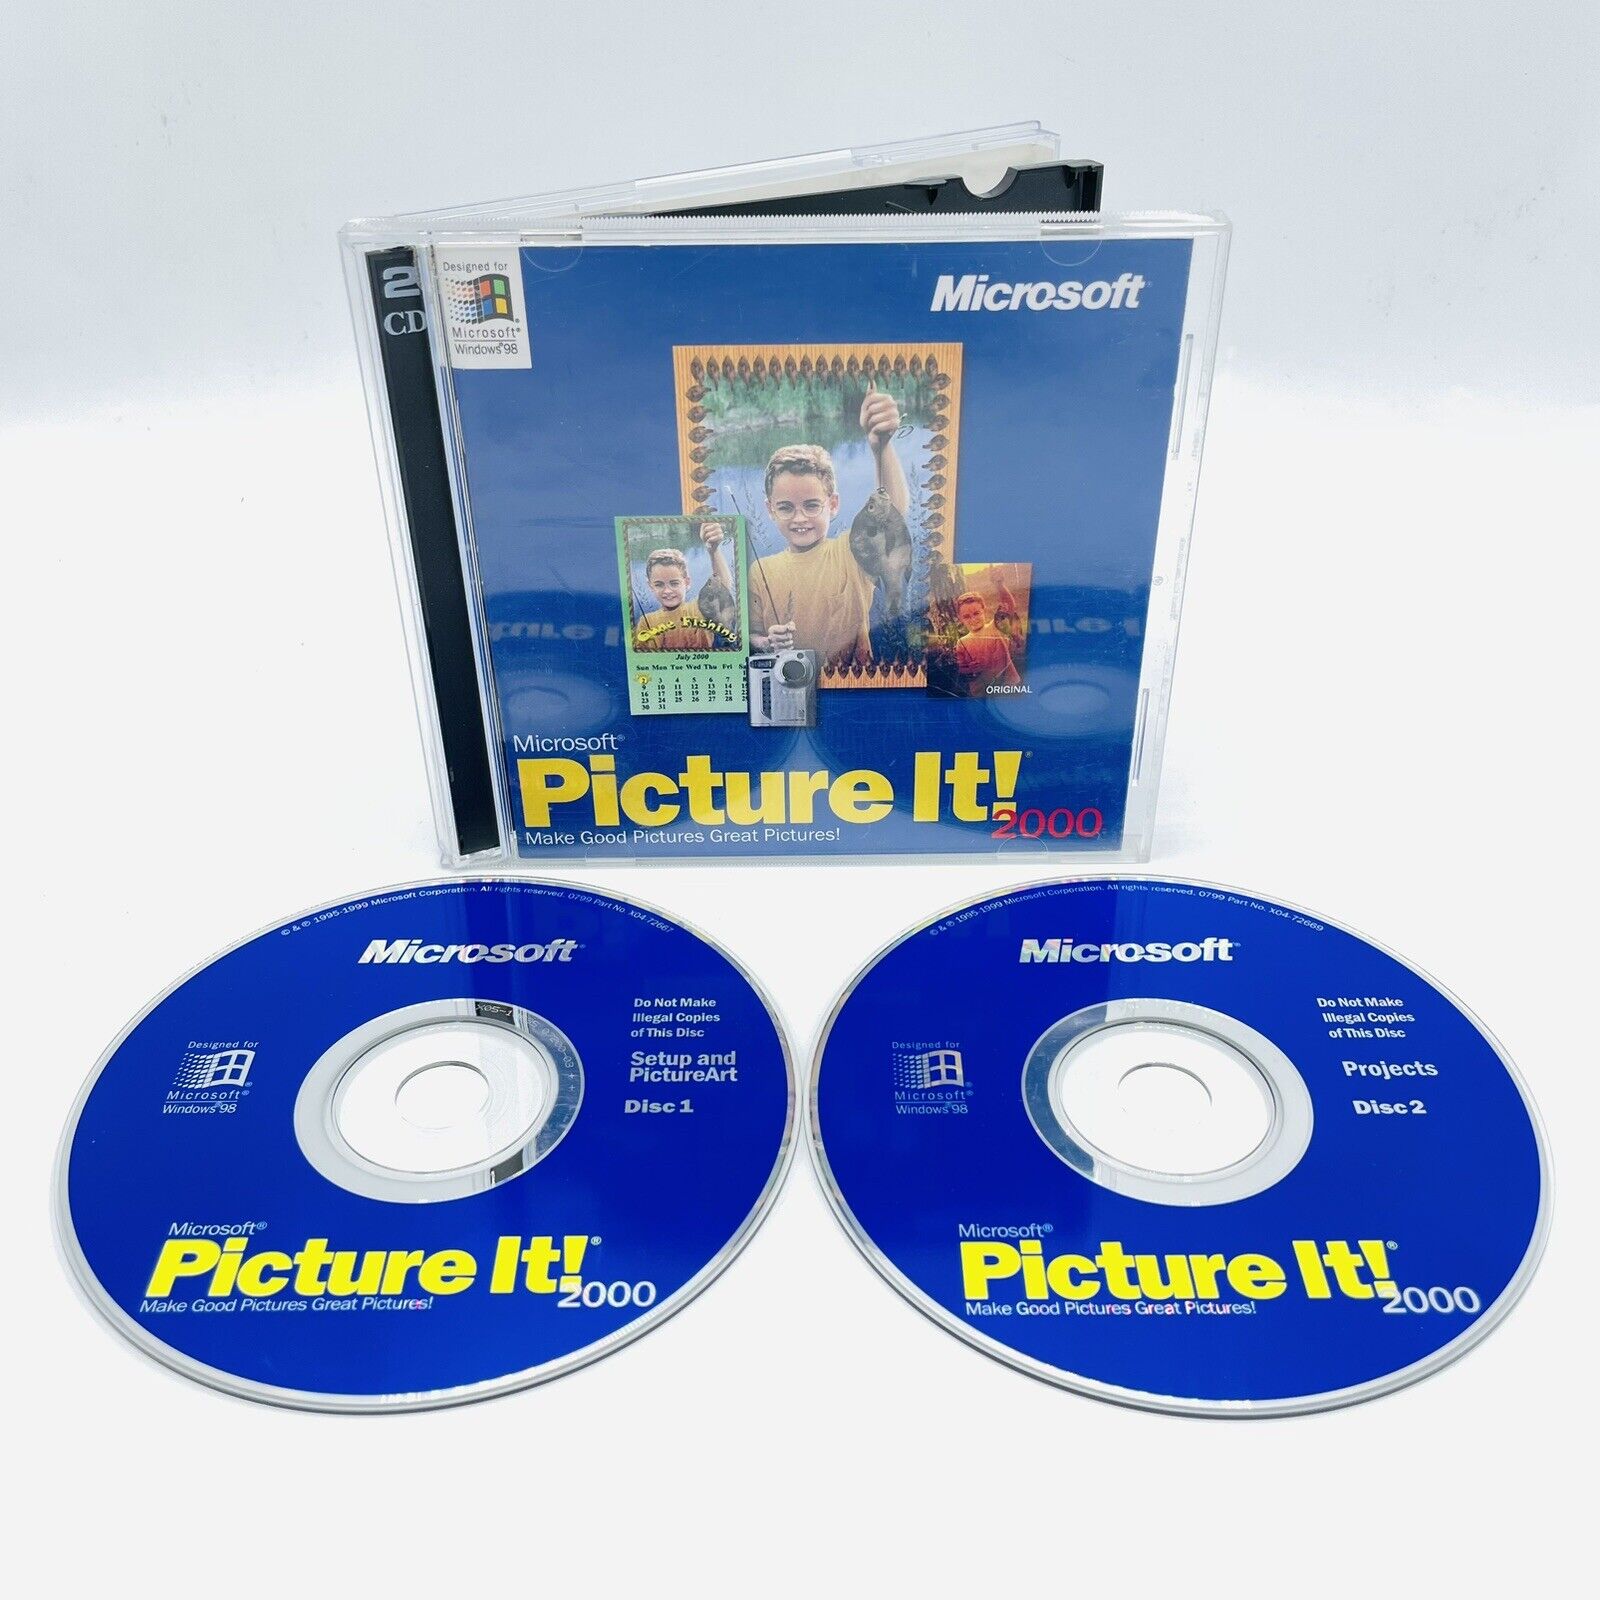 Microsoft Picture It 2000 For Windows PC, 2-Disc Set w/ CD Set #, TESTED Vintage